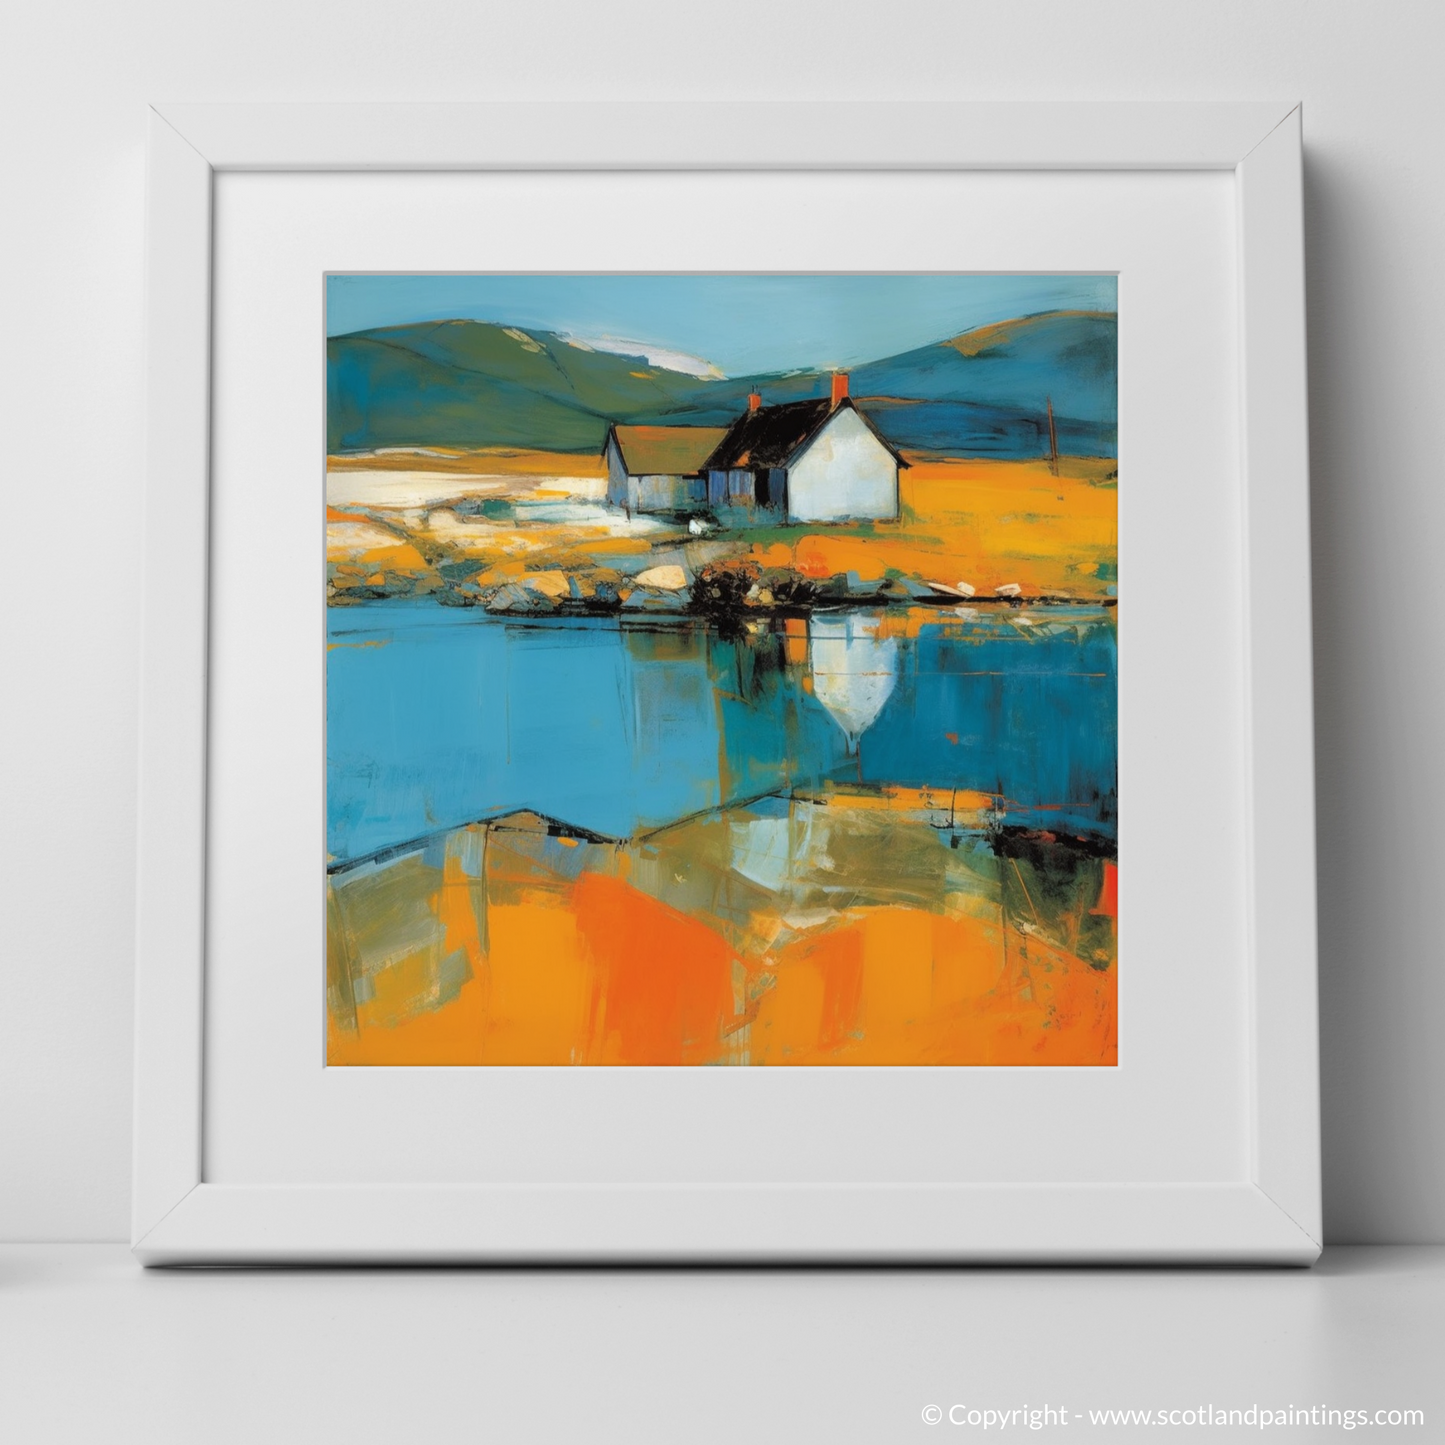 Enchanted Gairloch: An Abstract Impression of Highland Serenity